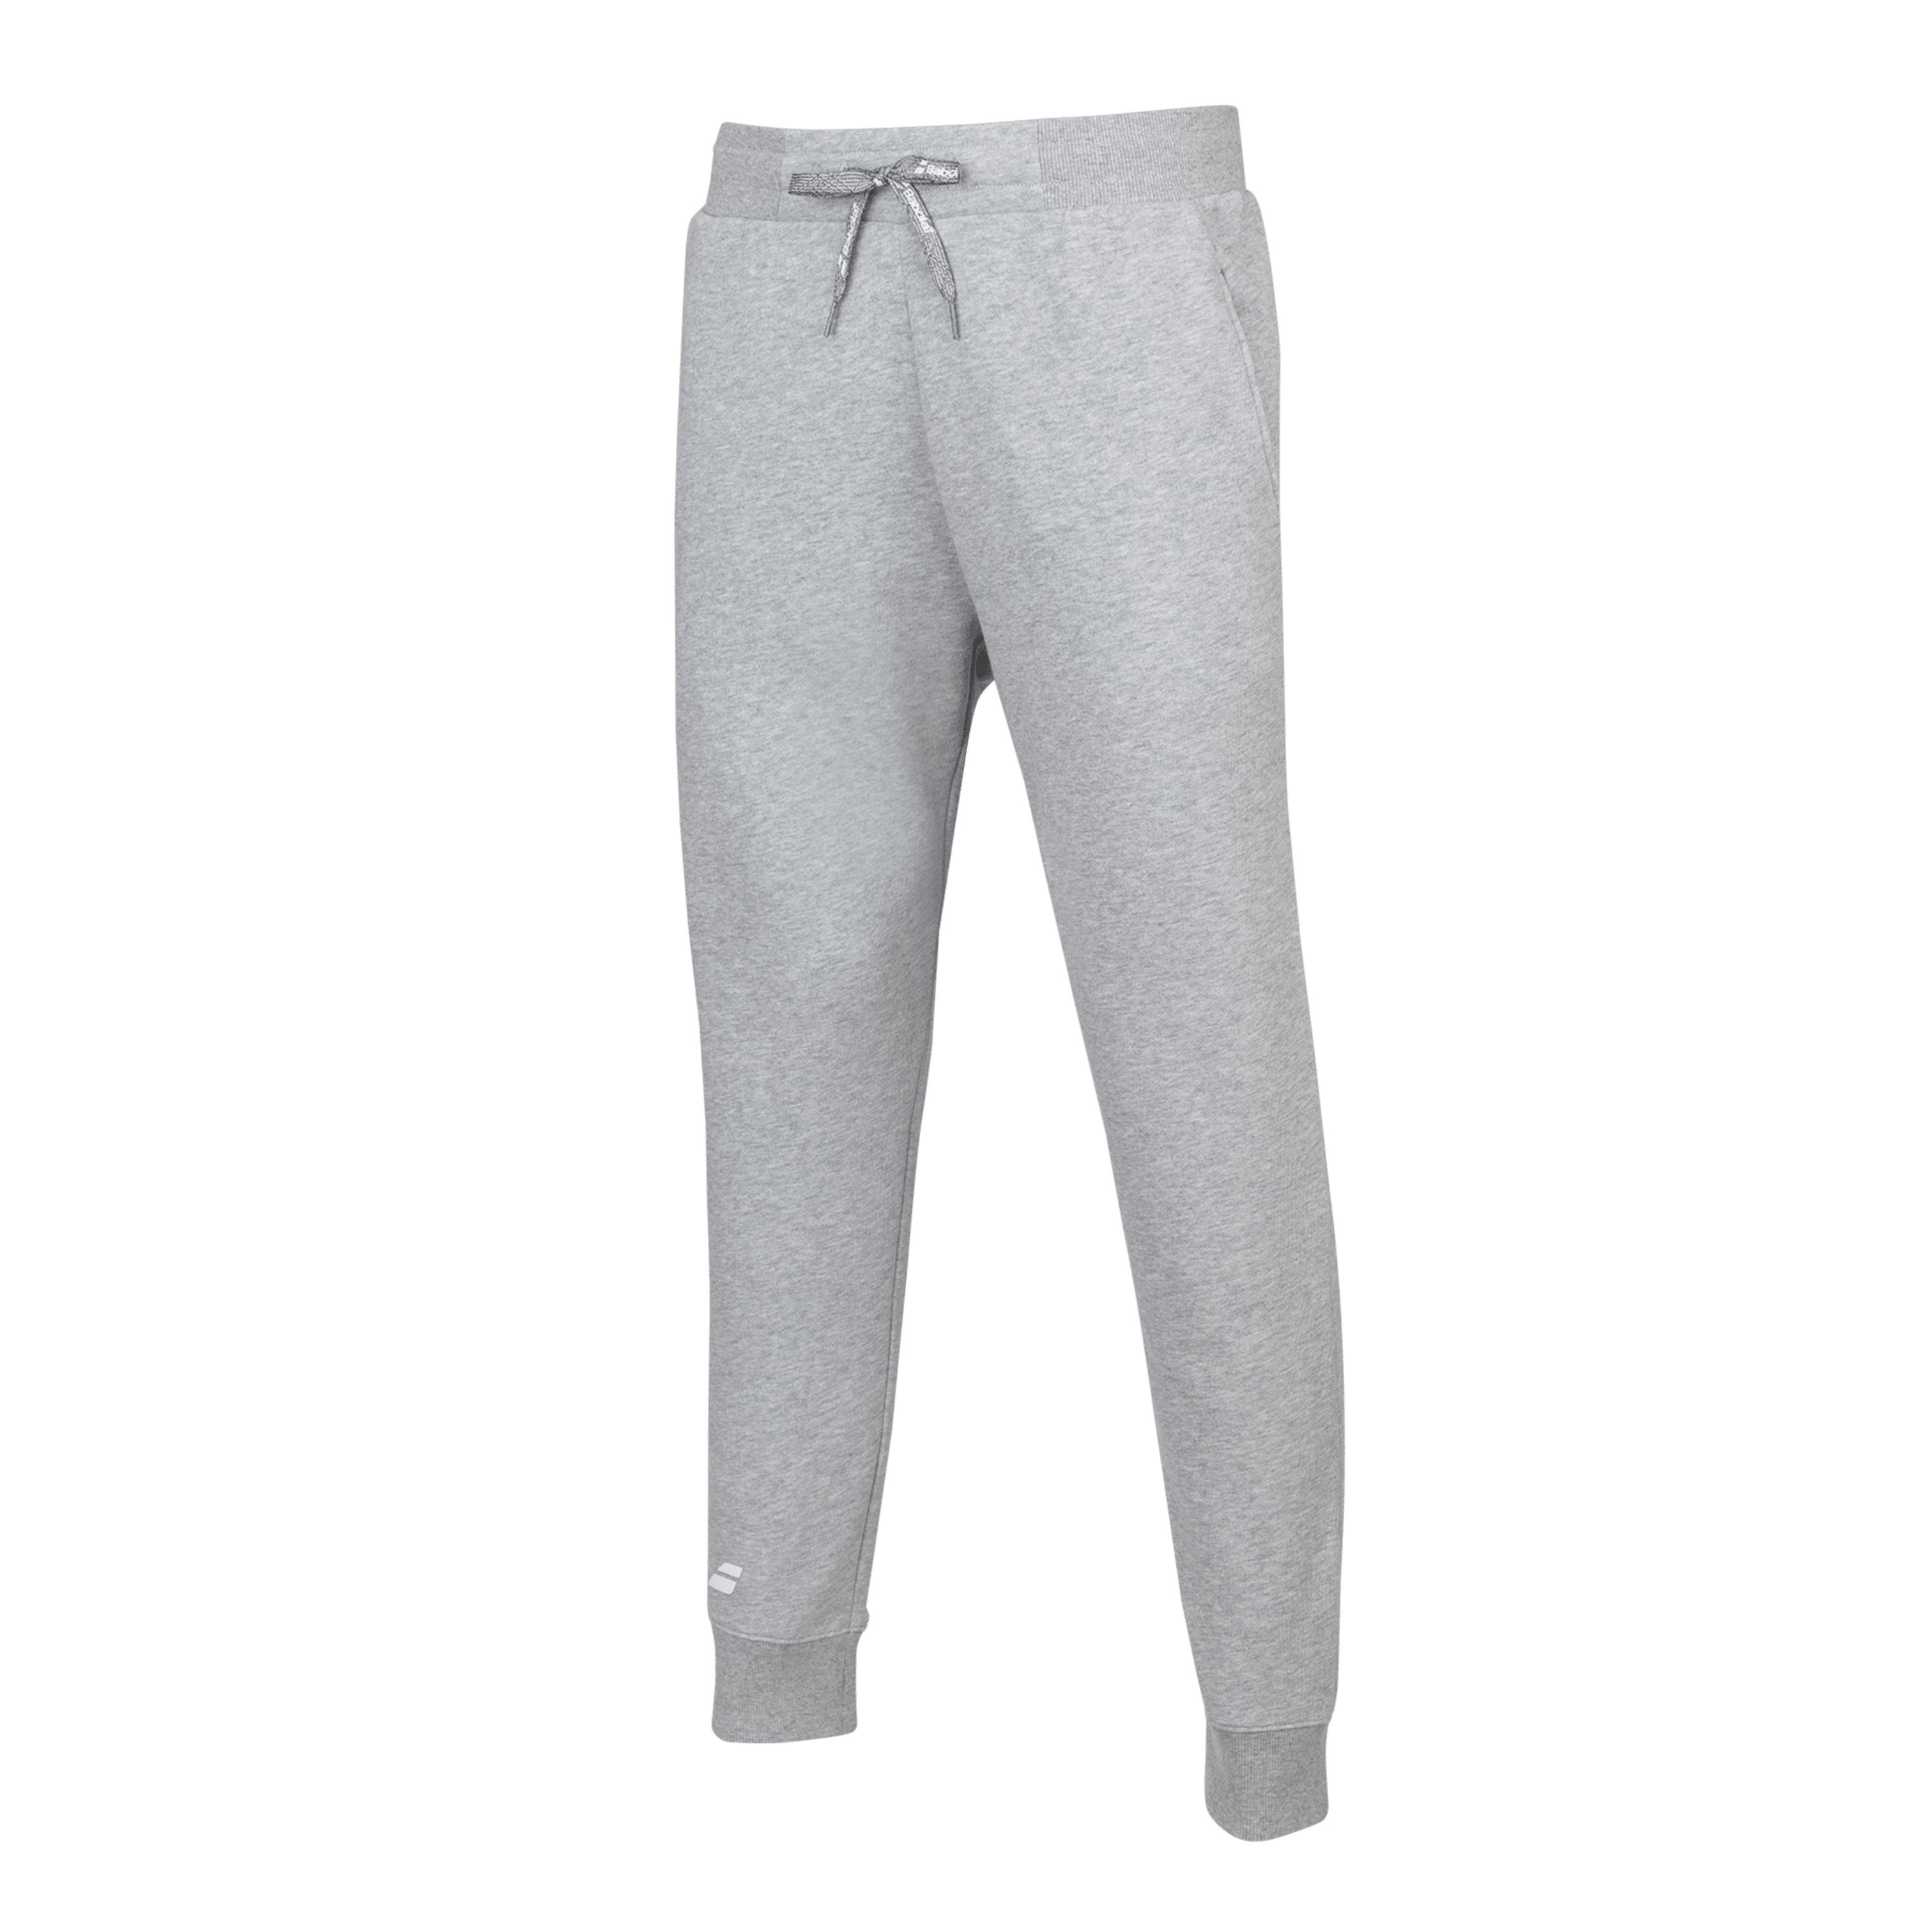 https://babolat.com.vn/wp-content/uploads/2021/09/4MP1131-Exercise_Jogger_Pant_M-3002-2-3_4.png